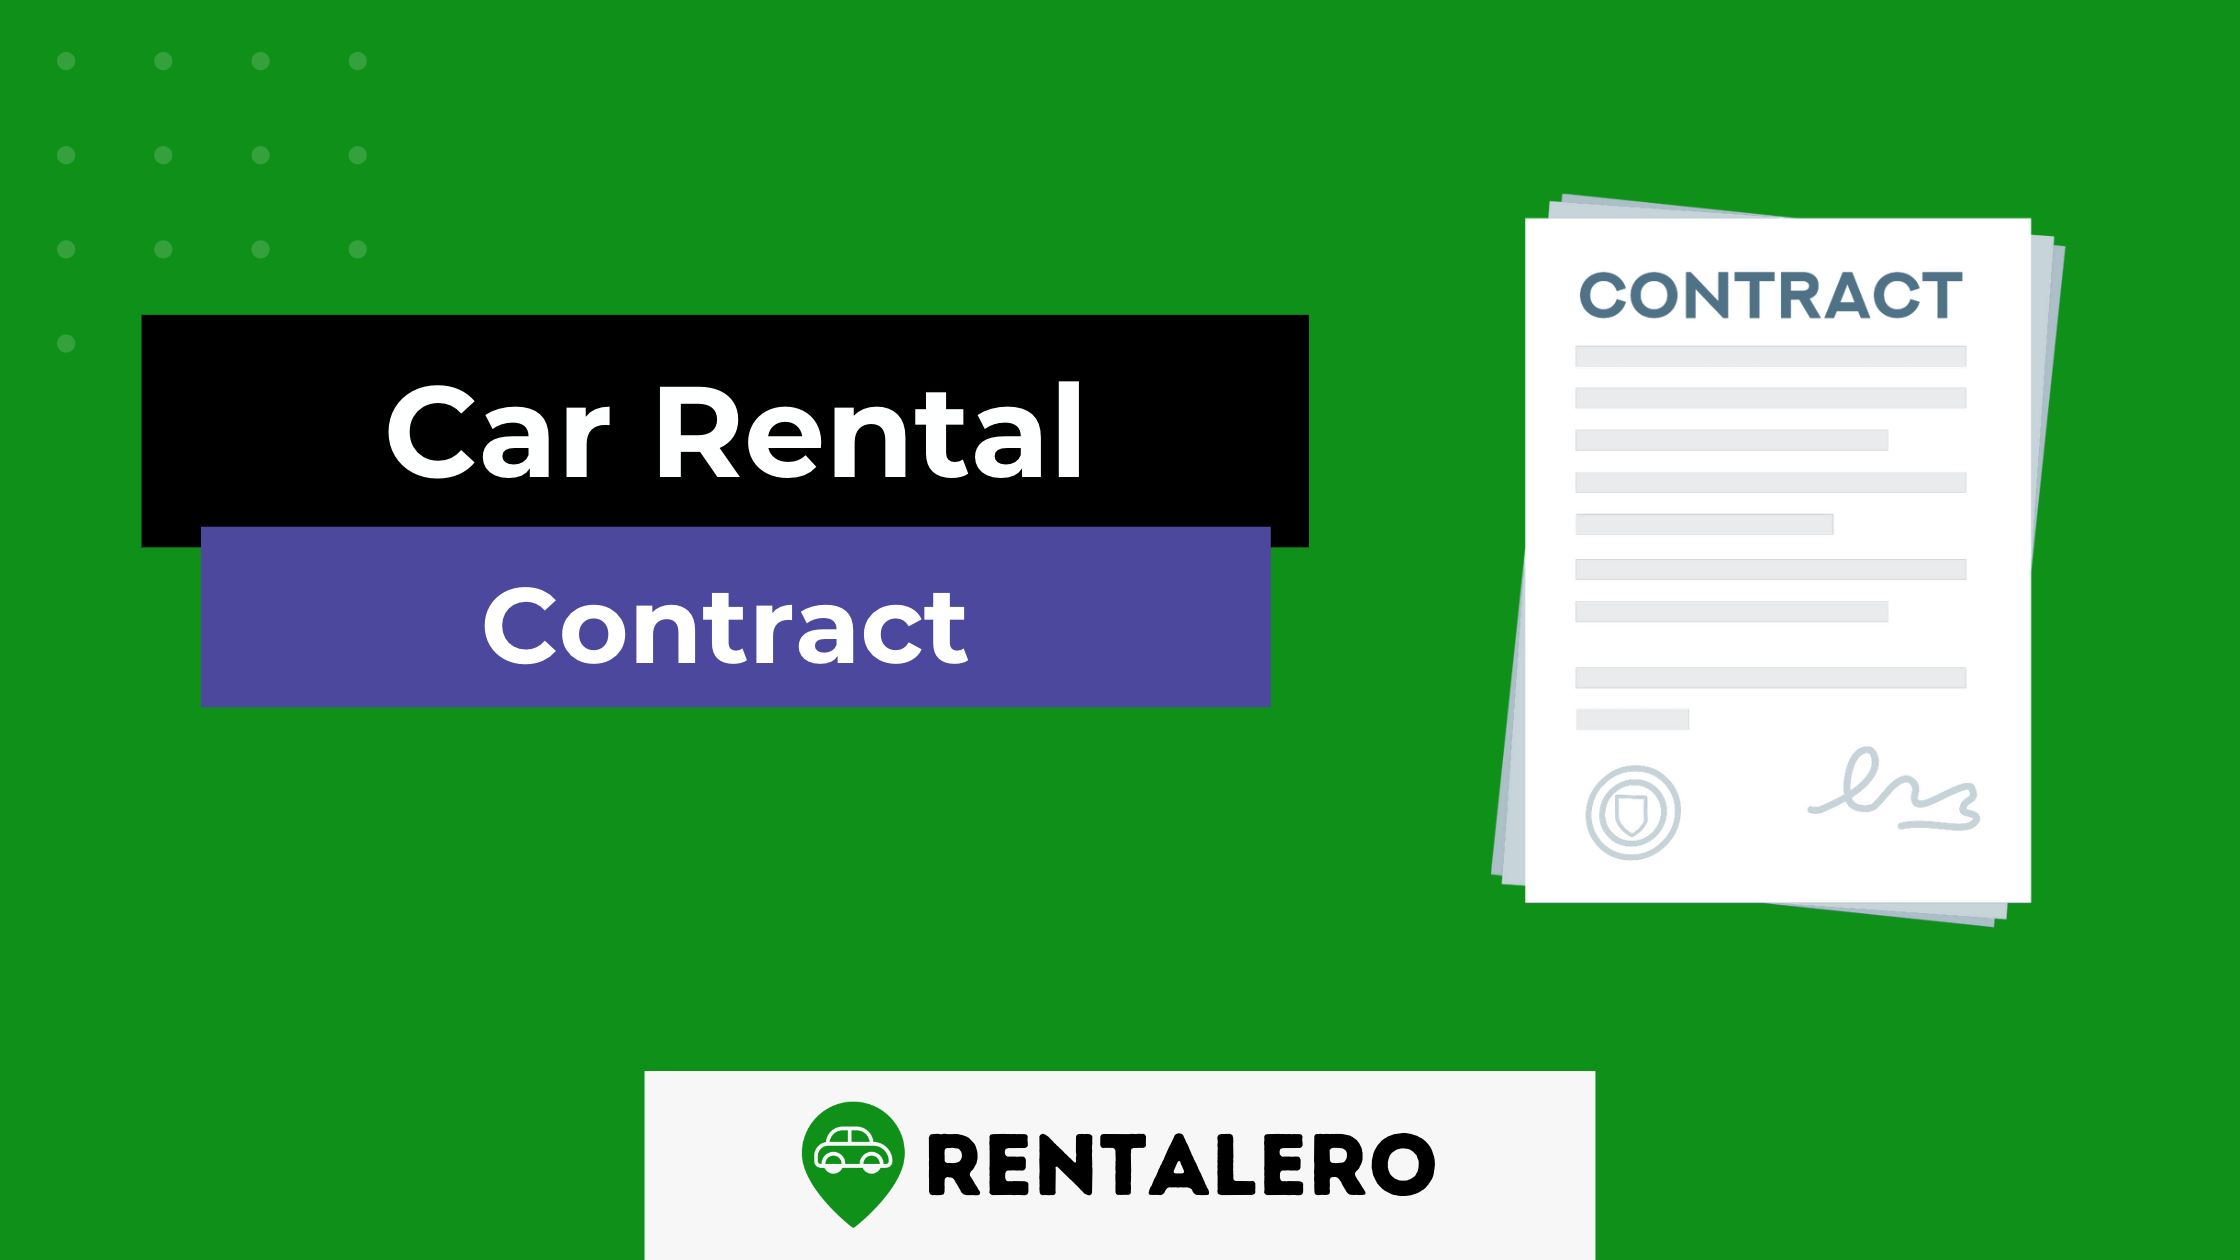 How to Make a Car Rental Contract: Step-by-Step Guide